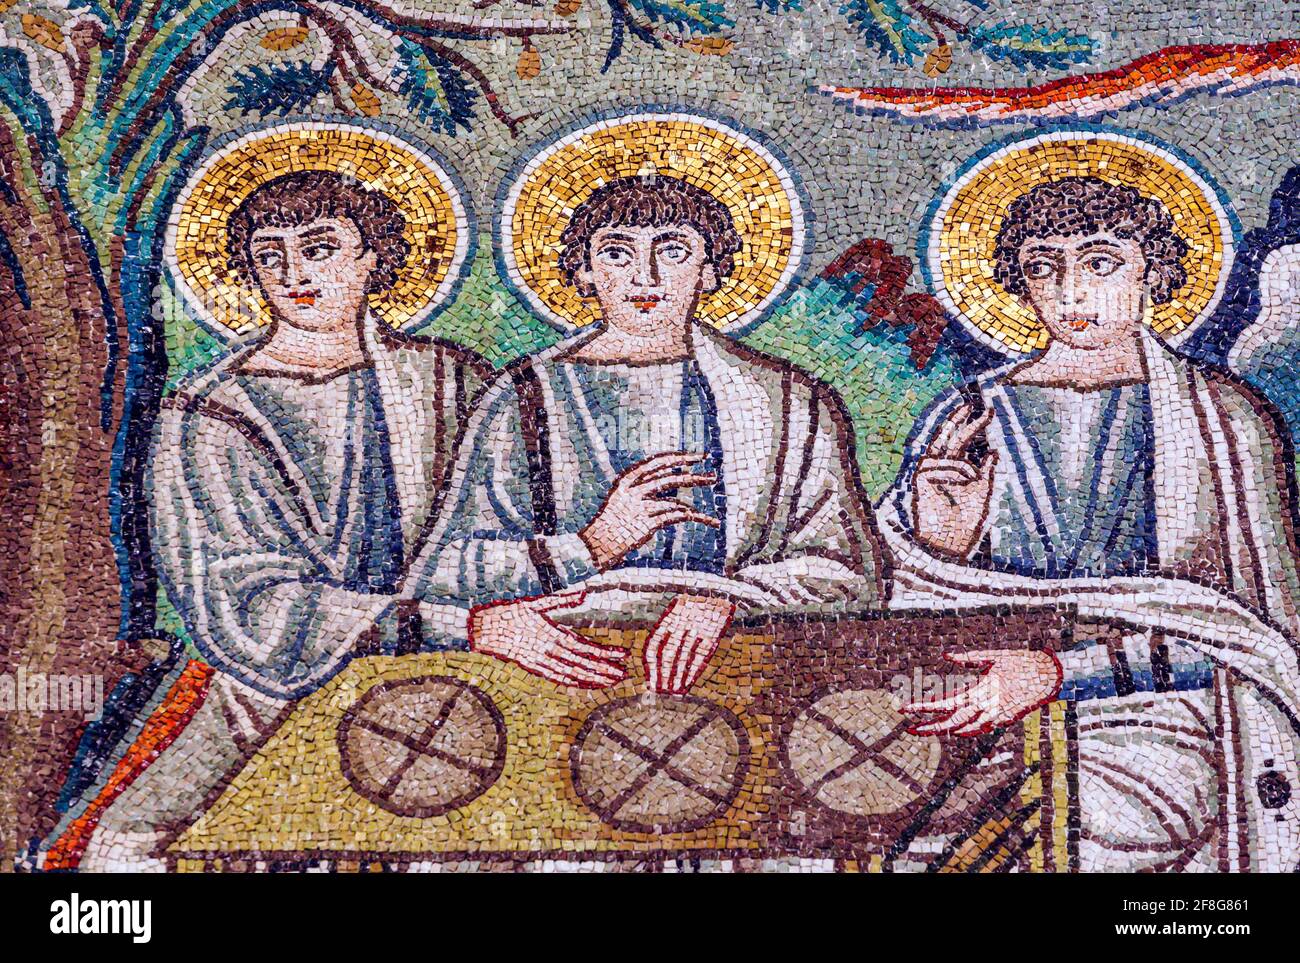 Ravenna, Ravenna Province, Italy. Mosaic in San Vitale basilica of three angels who visited Abraham with a message from God.  6th century.  The early Stock Photo